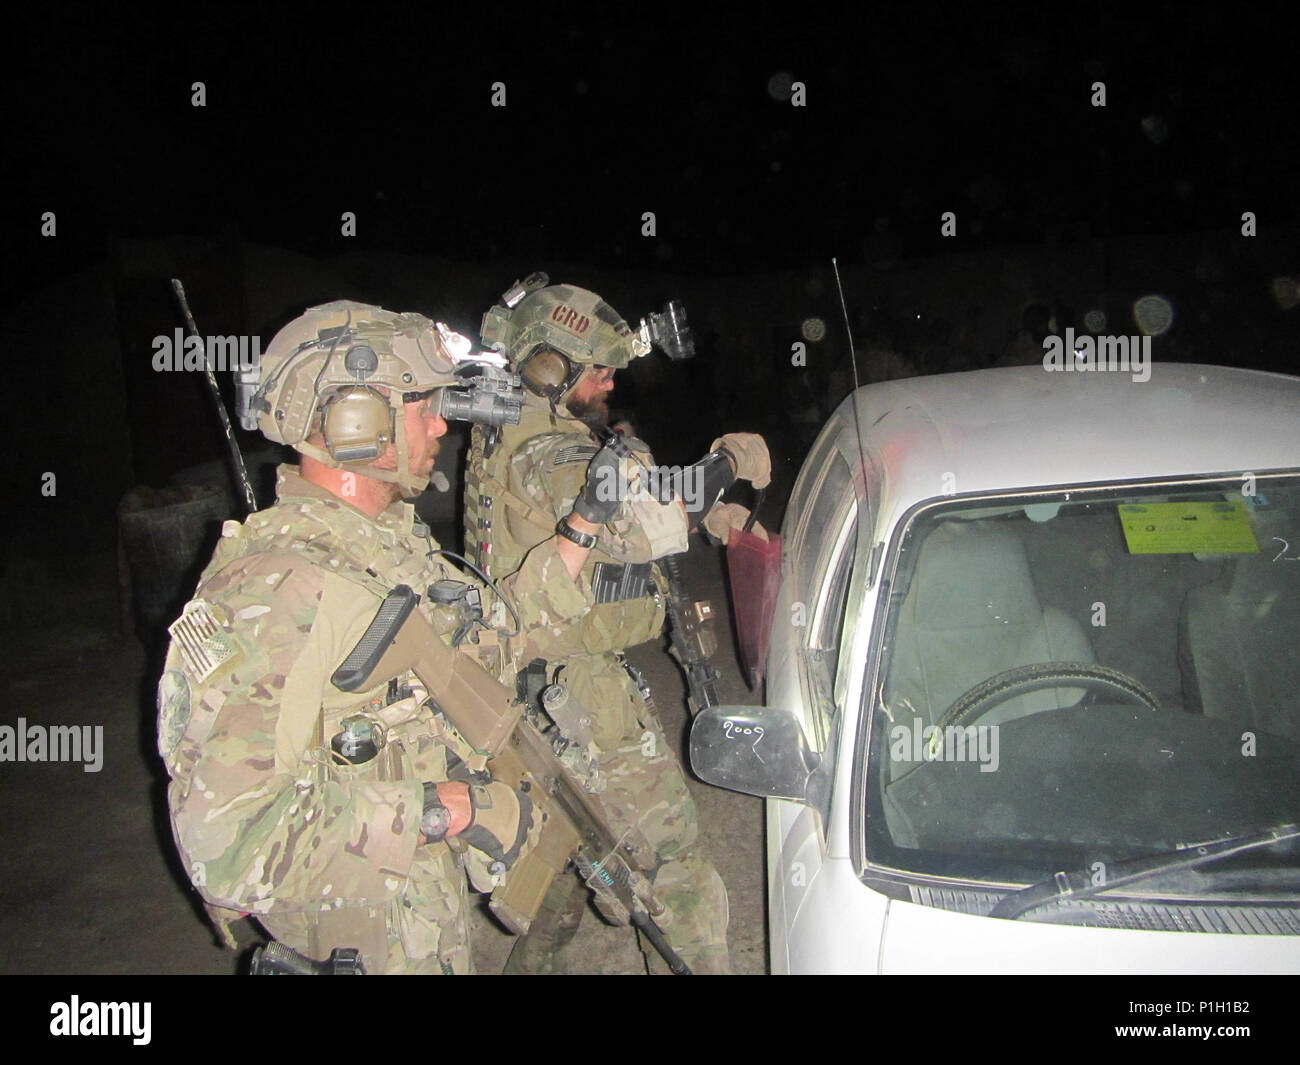 U.S. Special Forces Soldiers, attached to Special Operations Task Force-Afghanistan, conduct Sensitive Site Exploitation (SSE) inside a compound of interest during an operation in the Bakwah district, Farah province, Afghanistan, Oct. 17, 2016. The Operation was conducted, alongside Afghan police officers from the National Interdiction Unit (NIU), in order to disrupt the flow and production of narcotics and drug labs belonging to the Taliban in the area. (U.S. Army photo by Sgt. Connor Mendez/Reviewed) Stock Photo